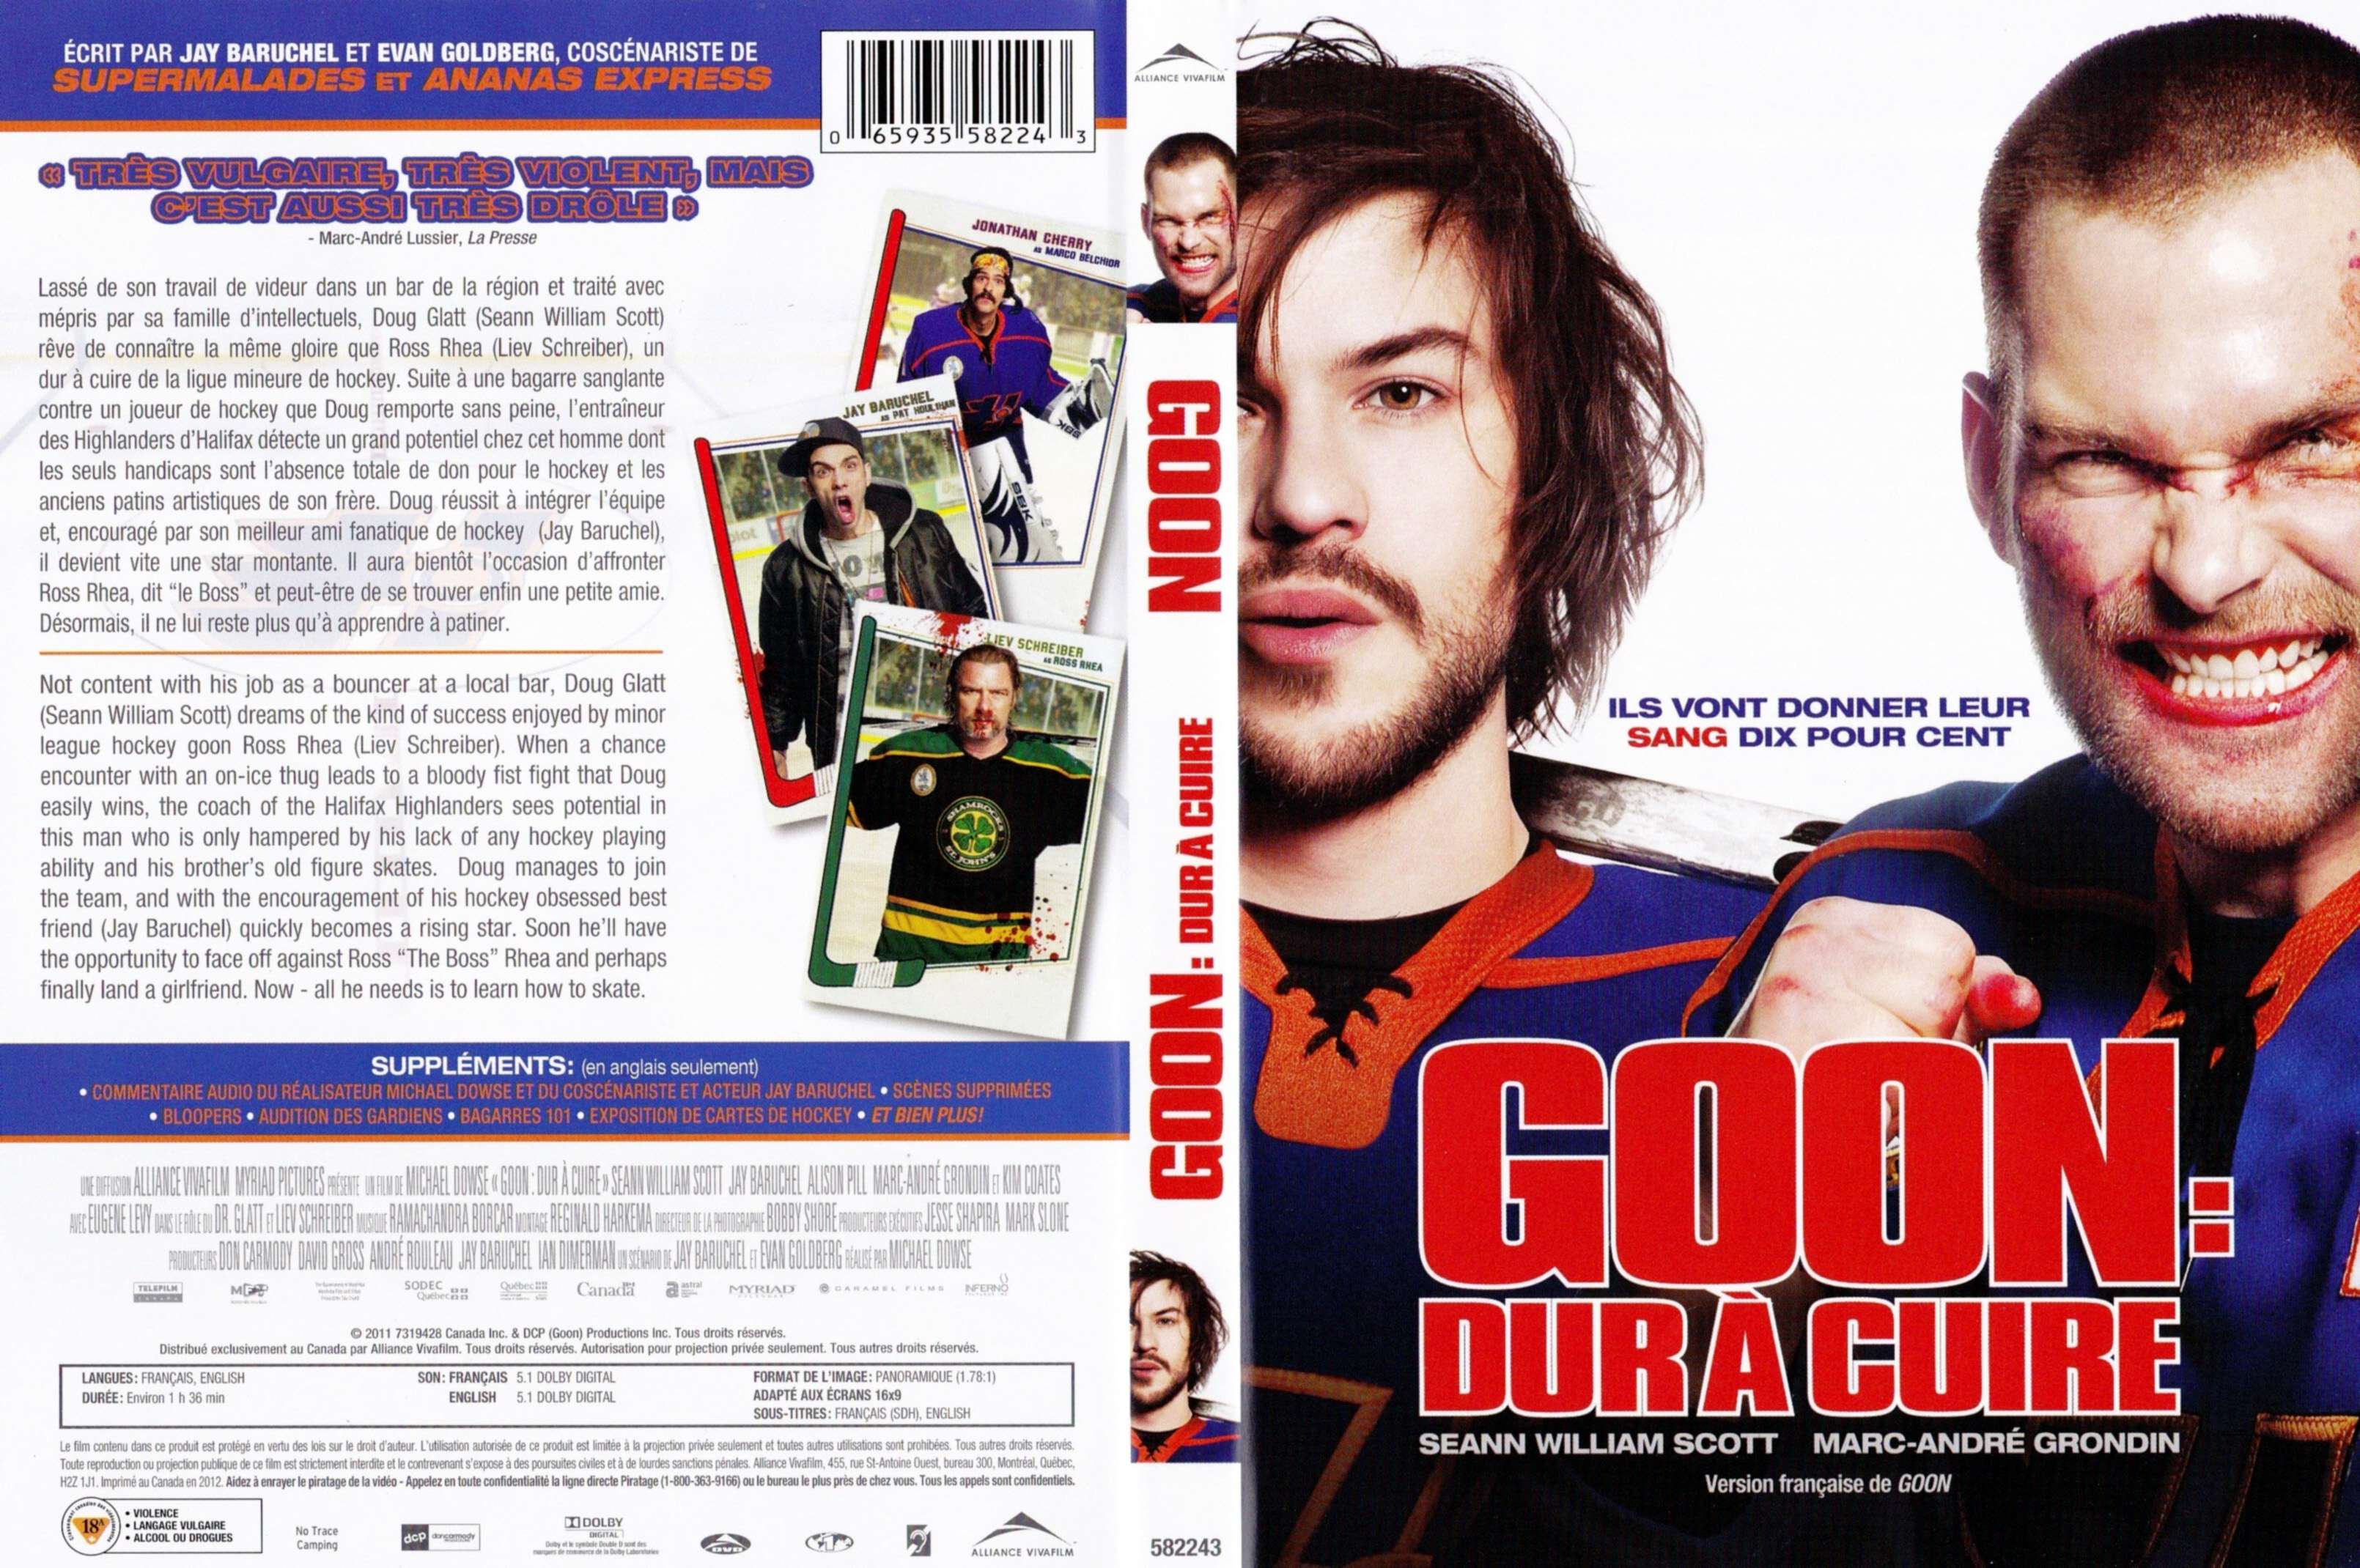 Jaquette DVD Goon - Dur  cuire (Canadienne)